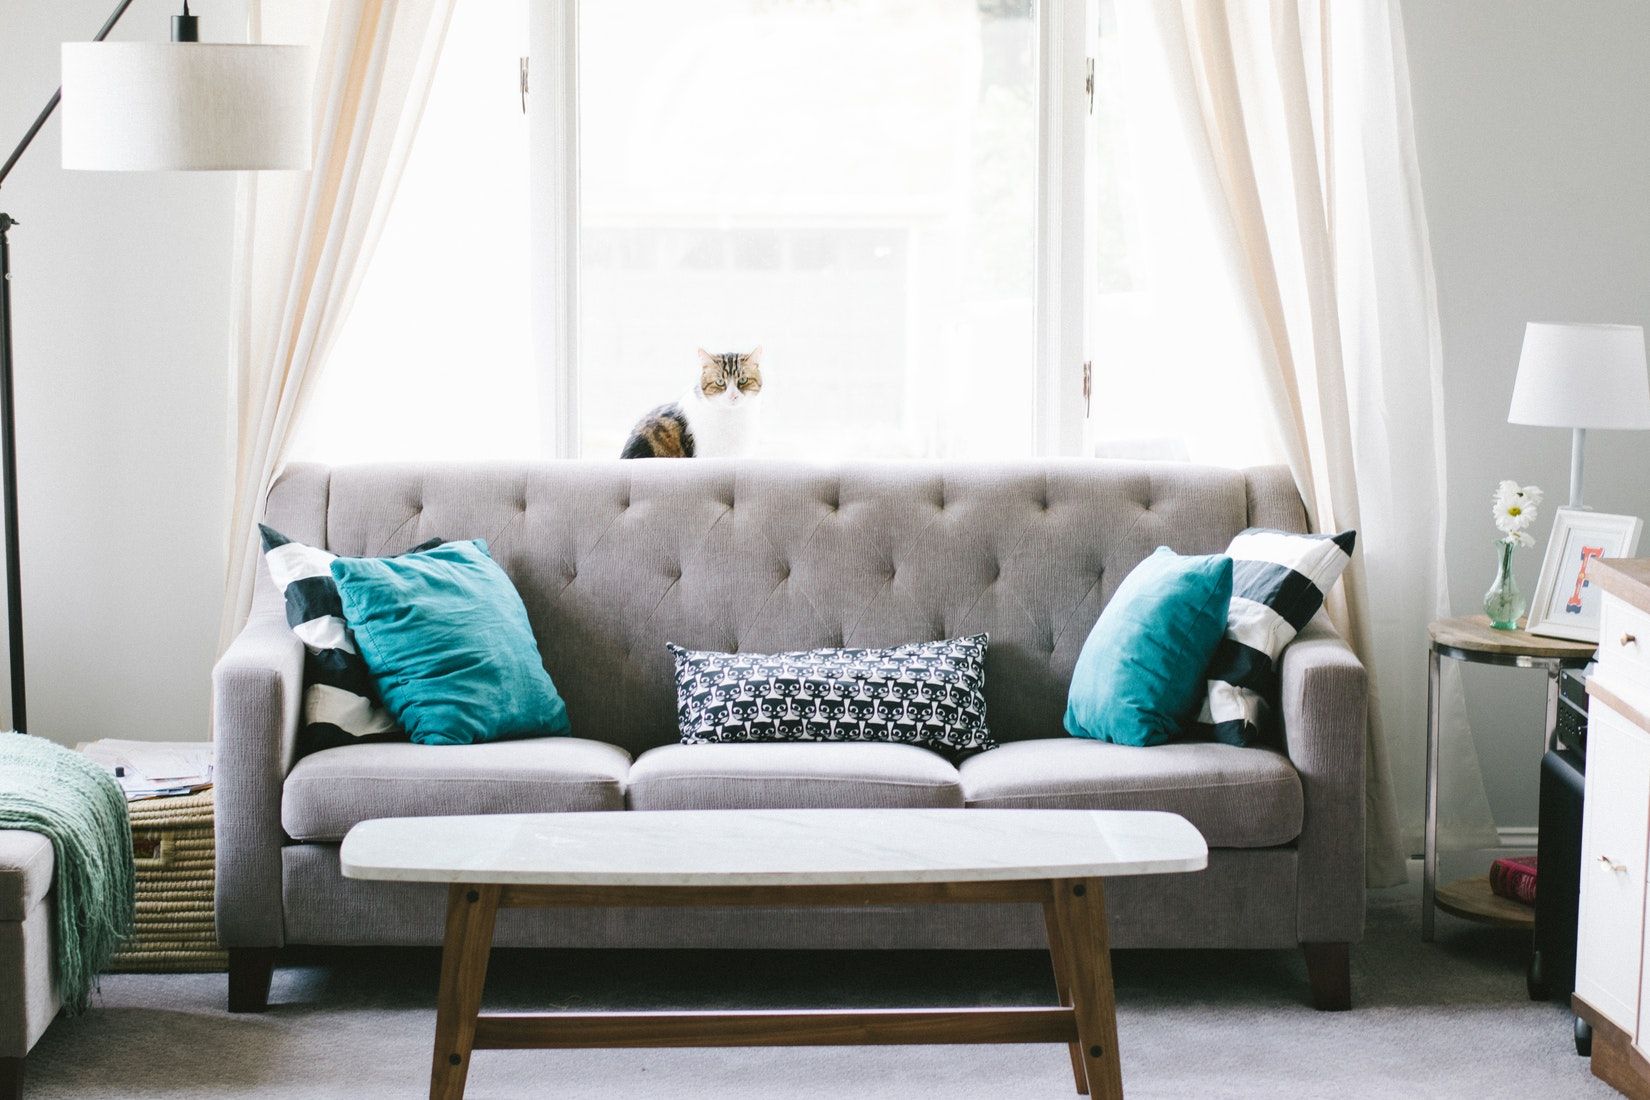 Wayfair, Ashley, Value City: The skinny on extended furniture warranties